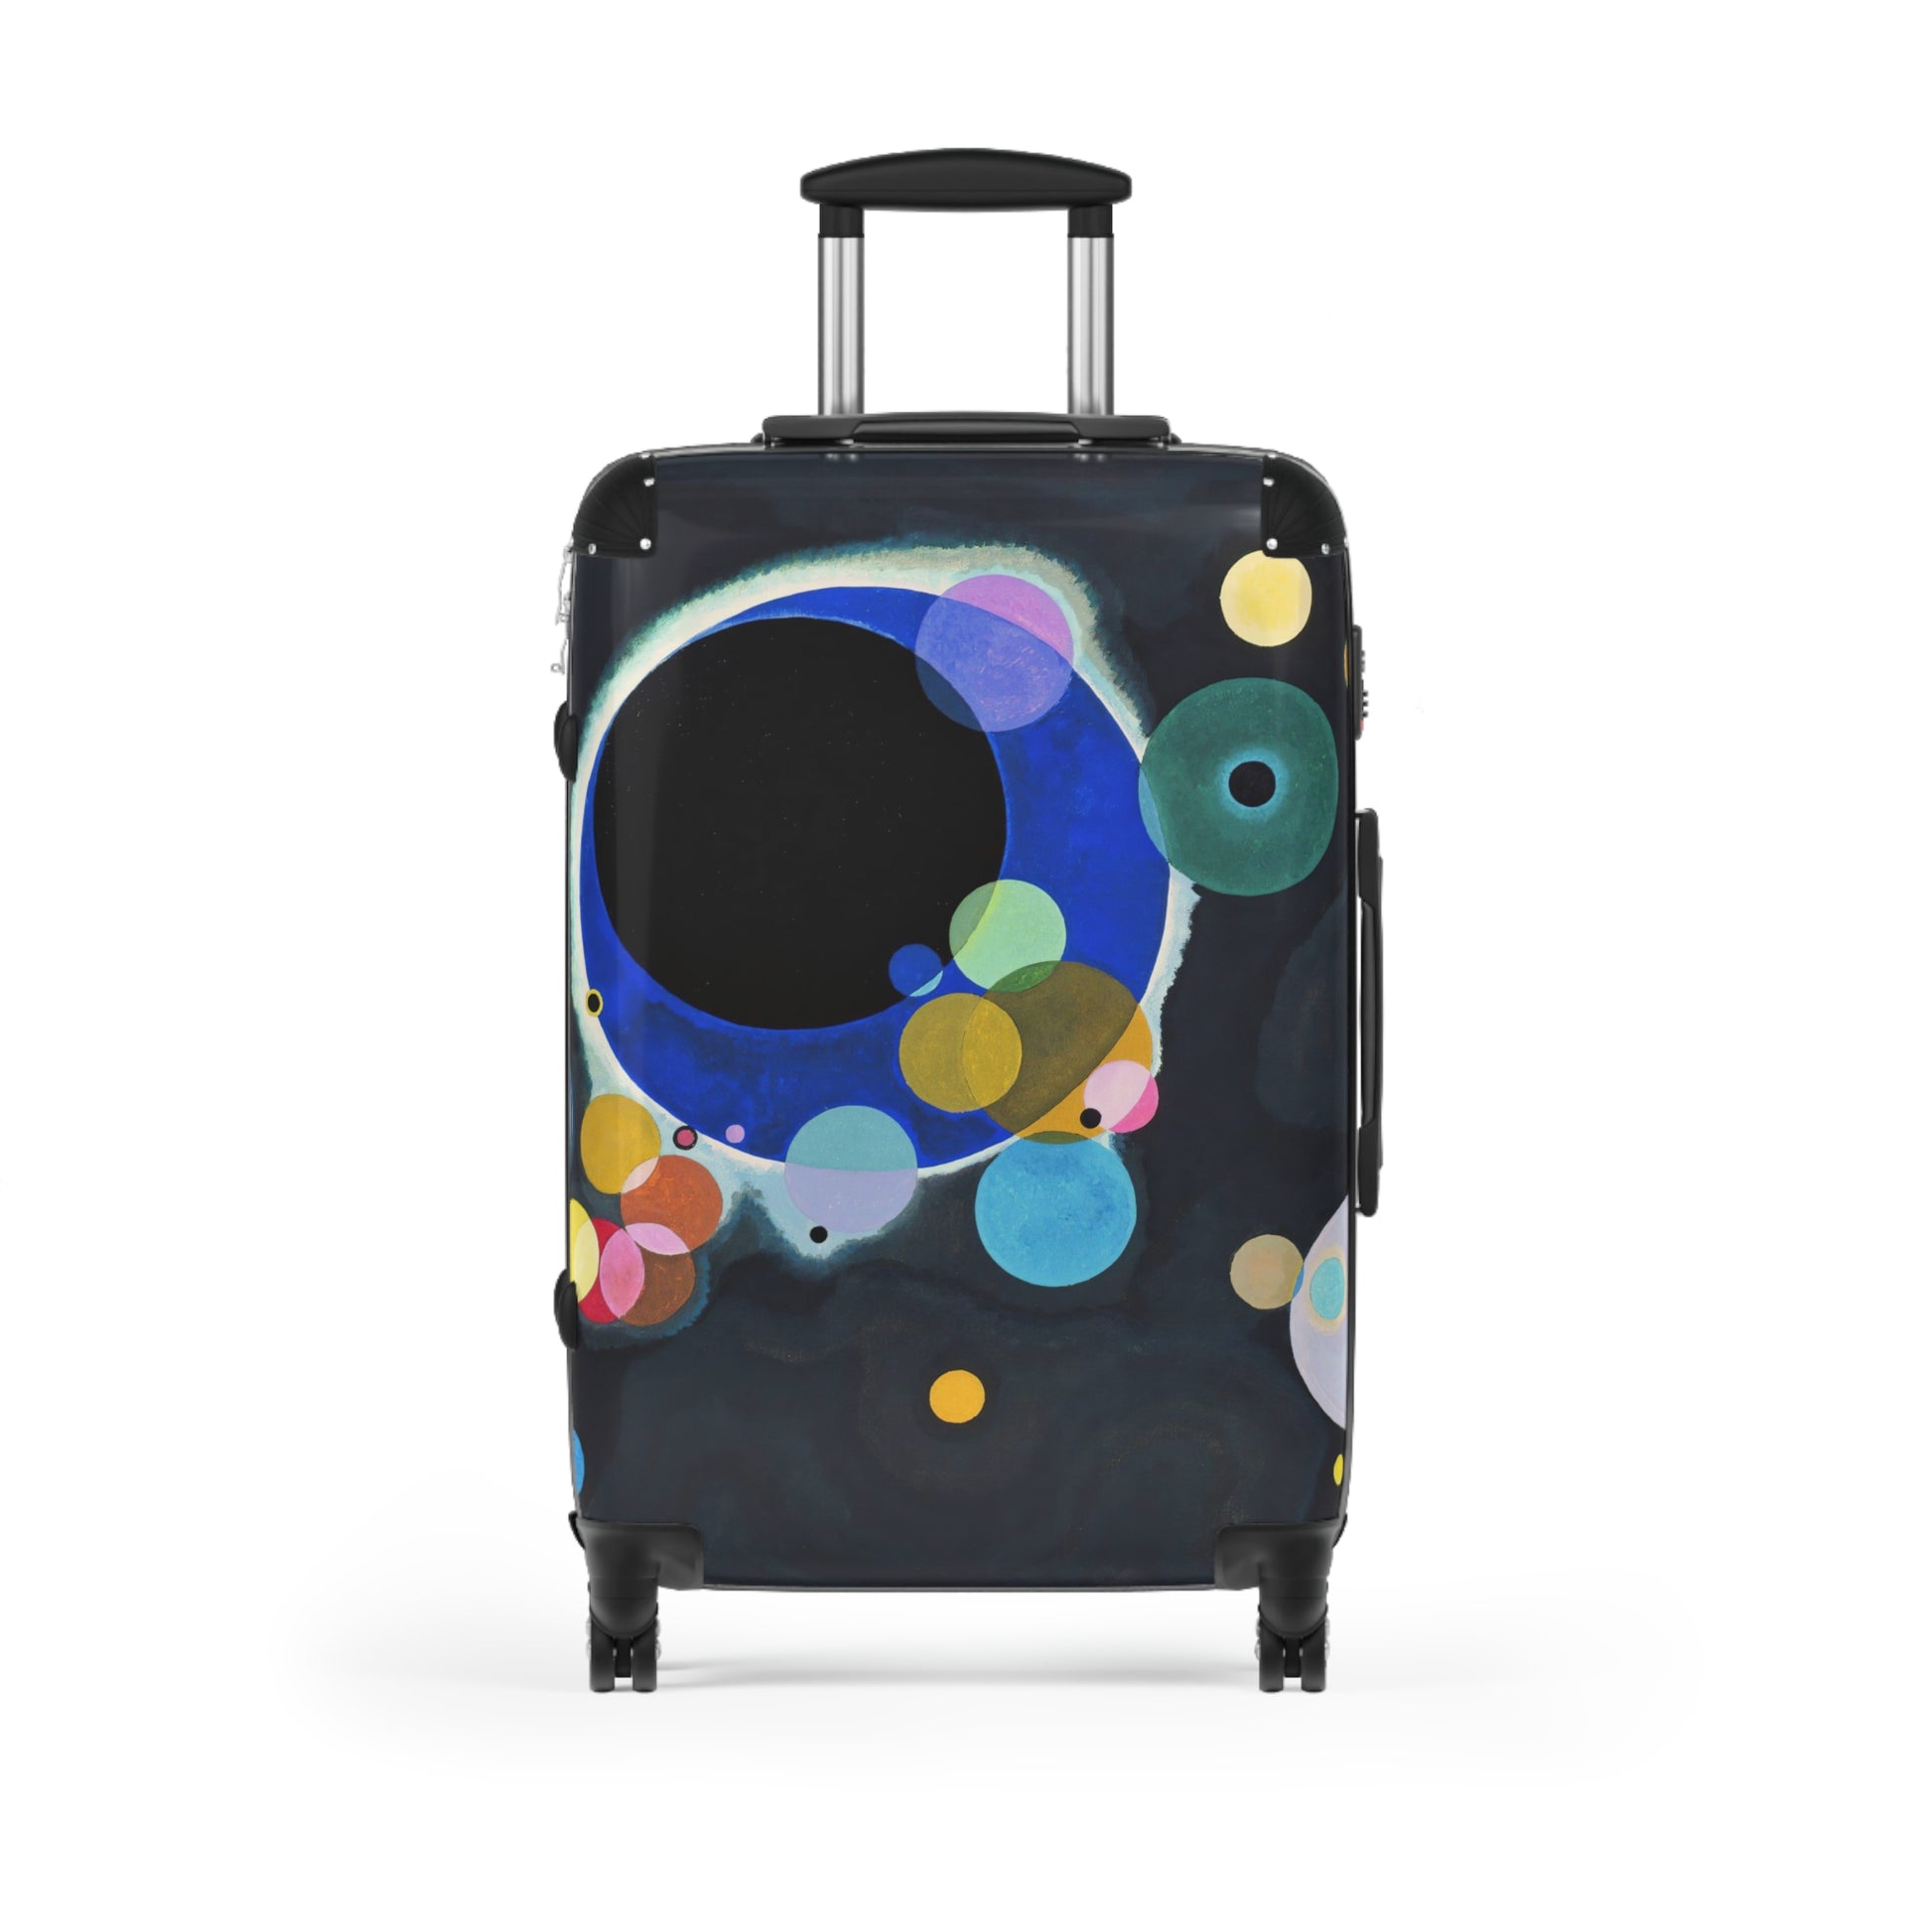 WASSILY KANDINSKY - SEVERAL CIRCLES - CARRY ON TRAVEL SUITCASE